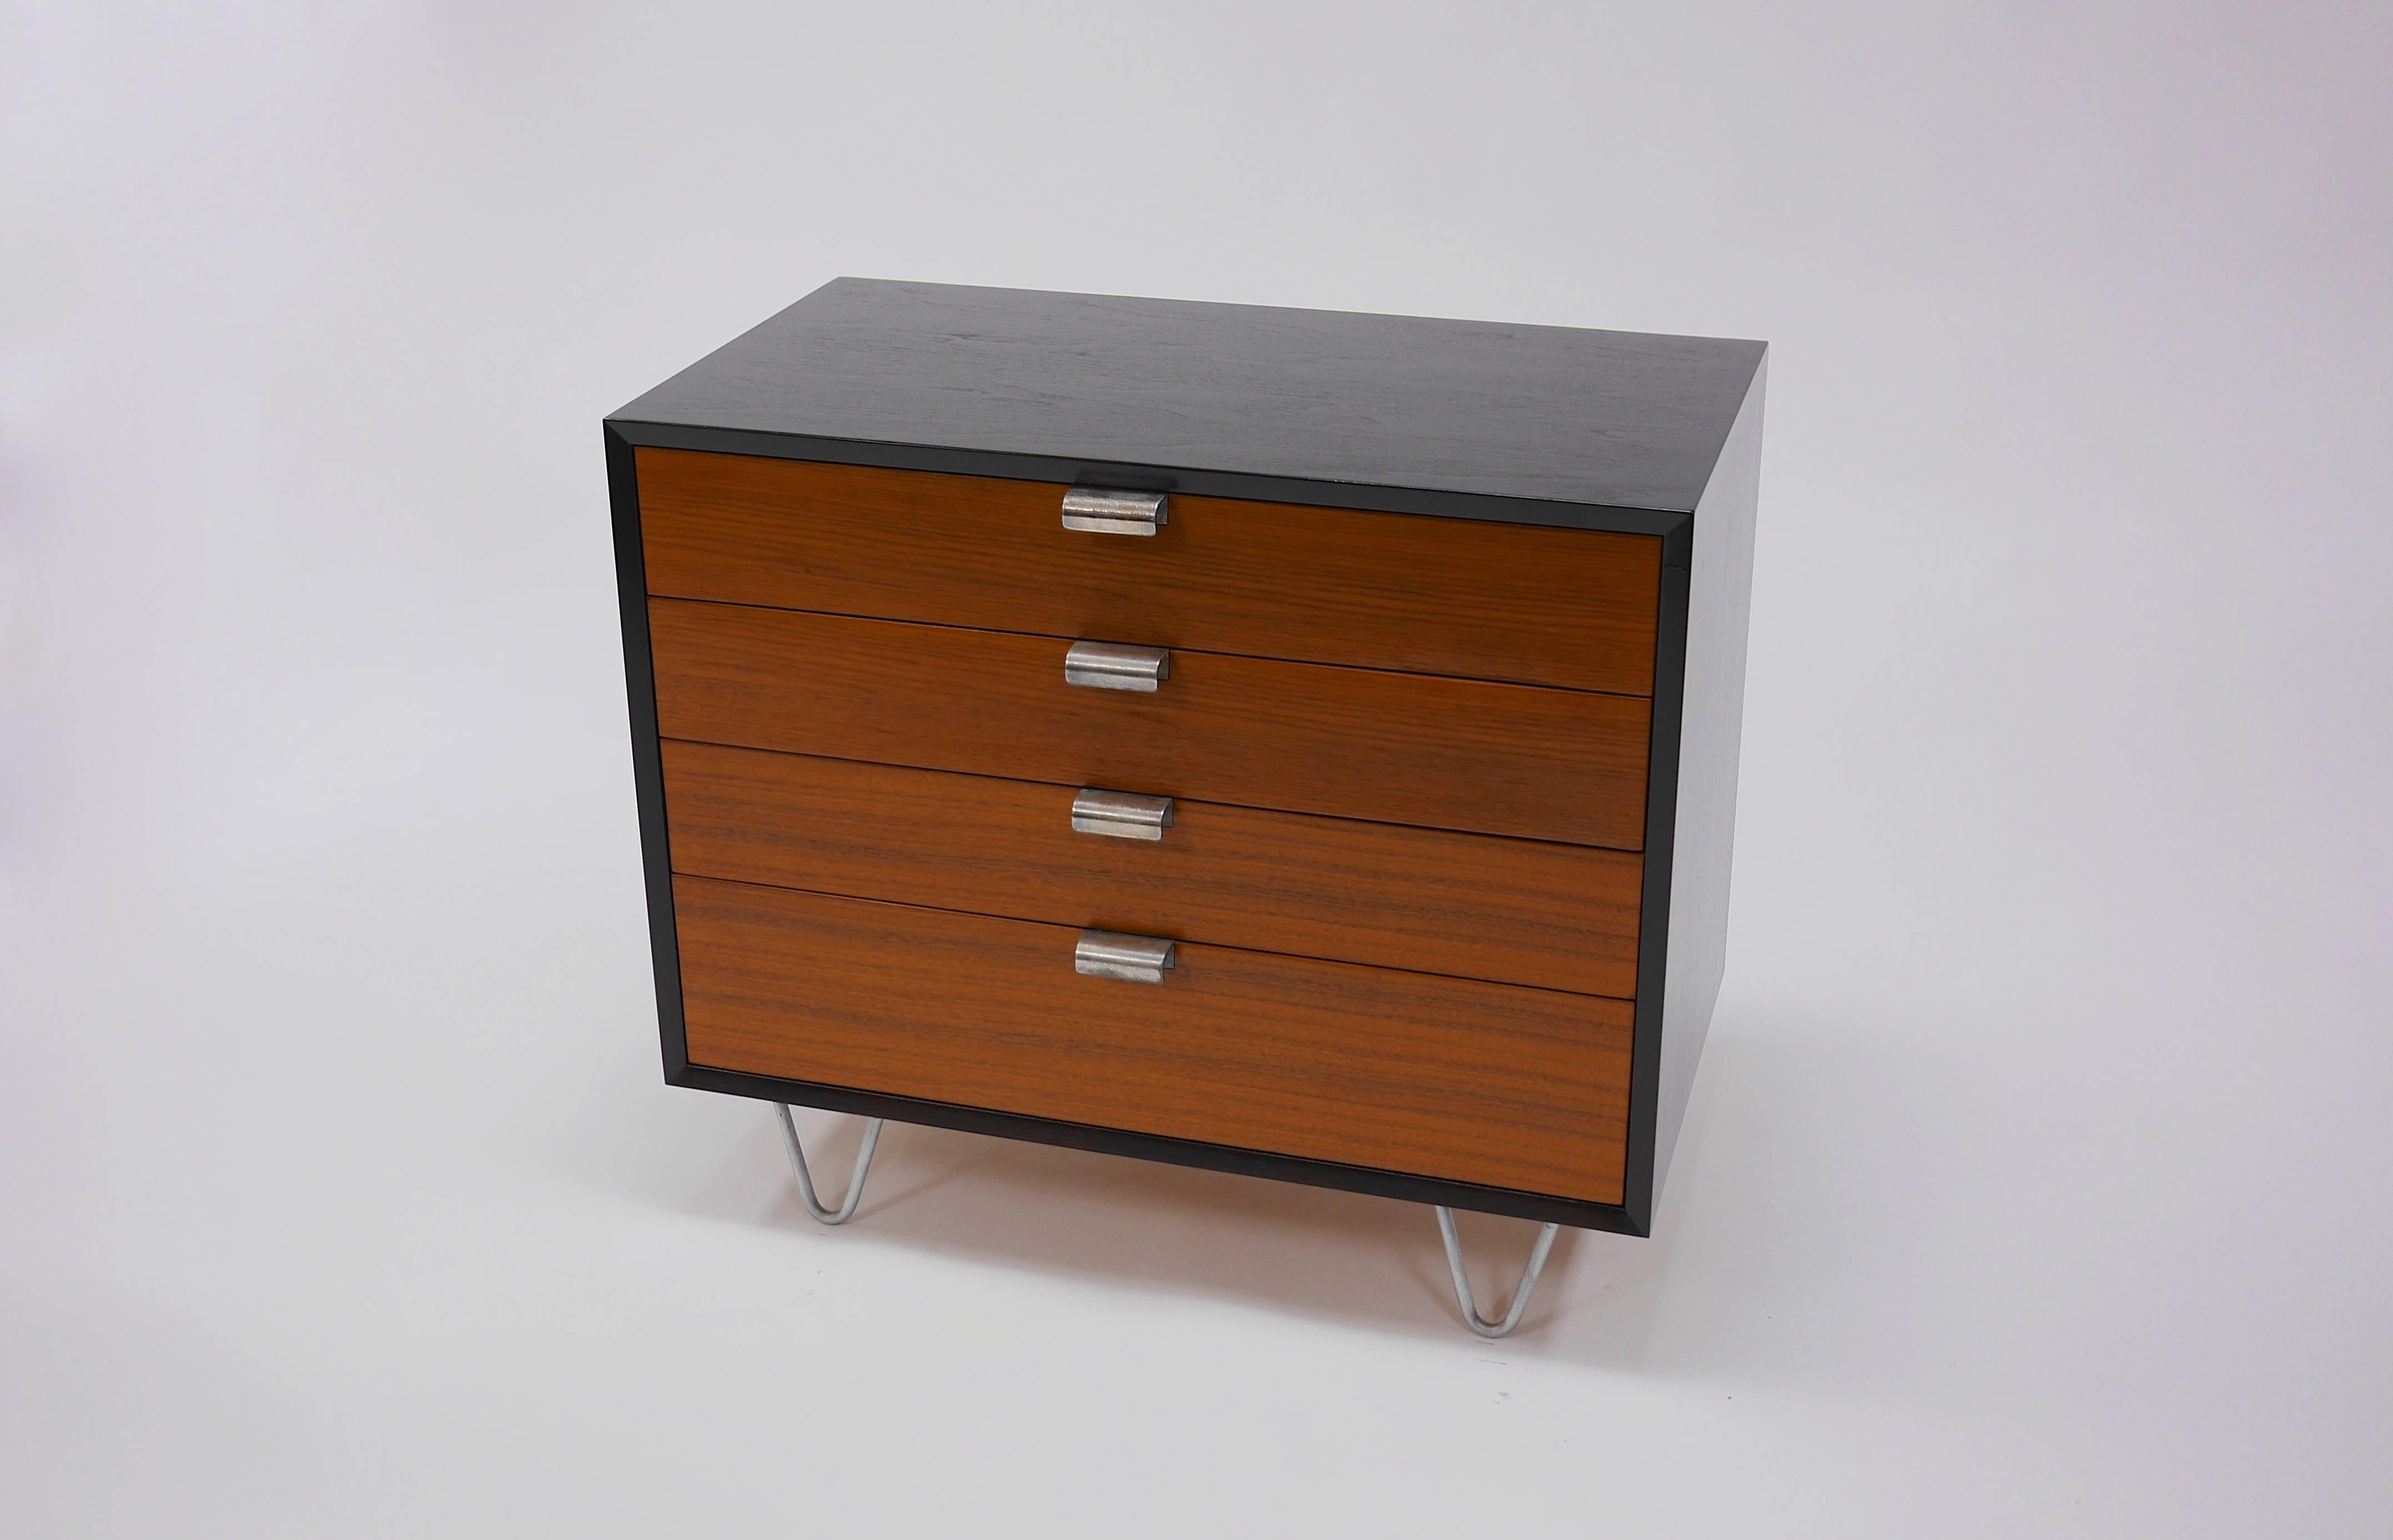 B.C.S series dresser by George Nelson for Herman Miller. Having four drawers with 